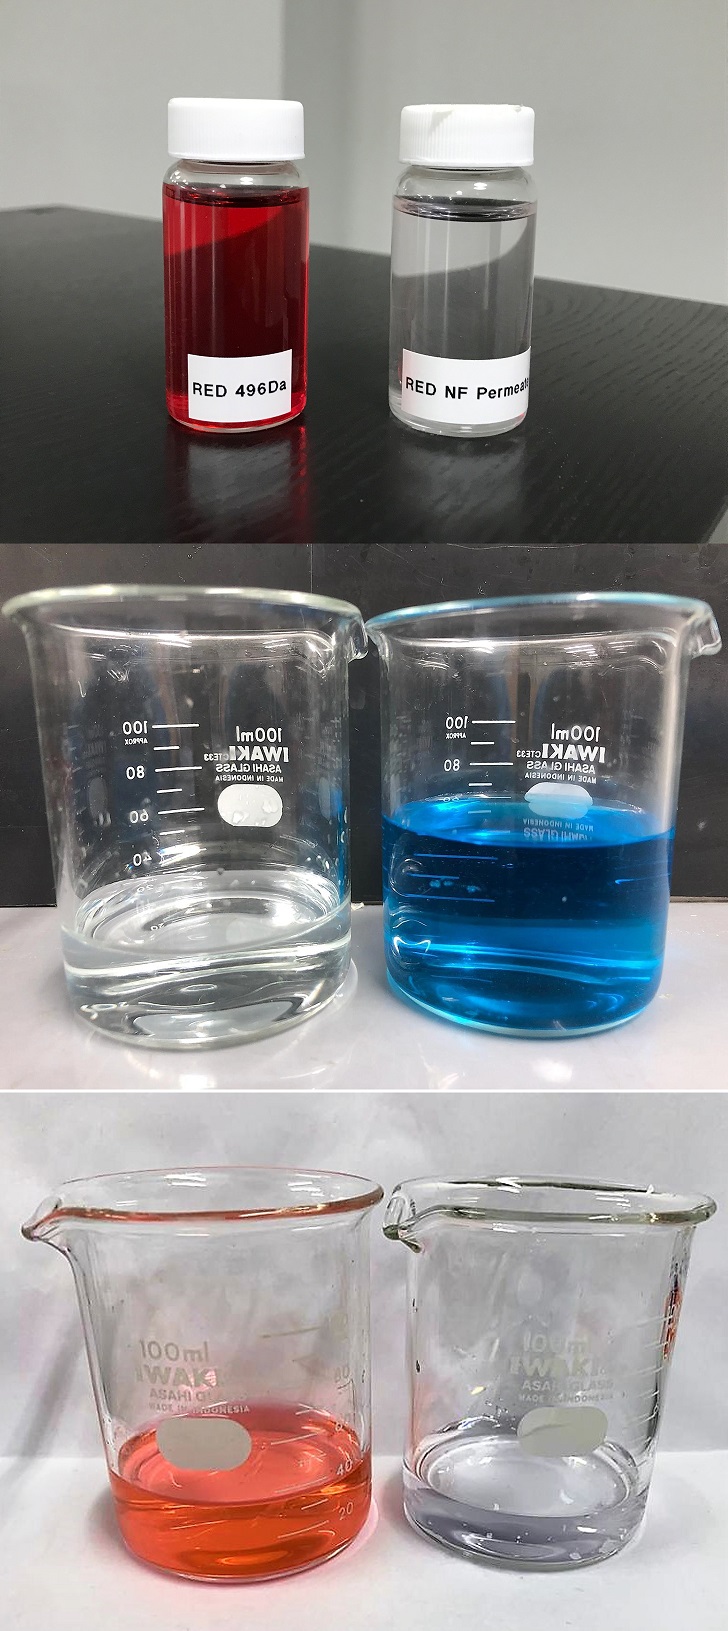 Figure 4. De.mem has tested its new hollow-fibre nanofiltration membrane extensively on different types of dyes, which vary in terms of particle size as specified by their respective molecular weight in Daltons (Da). Shown here are three test results for Allura Red (496 Da) (top); Brilliant Blue FCF (793 Da) (middle); and Erythrosine (880 Da) (bottom).